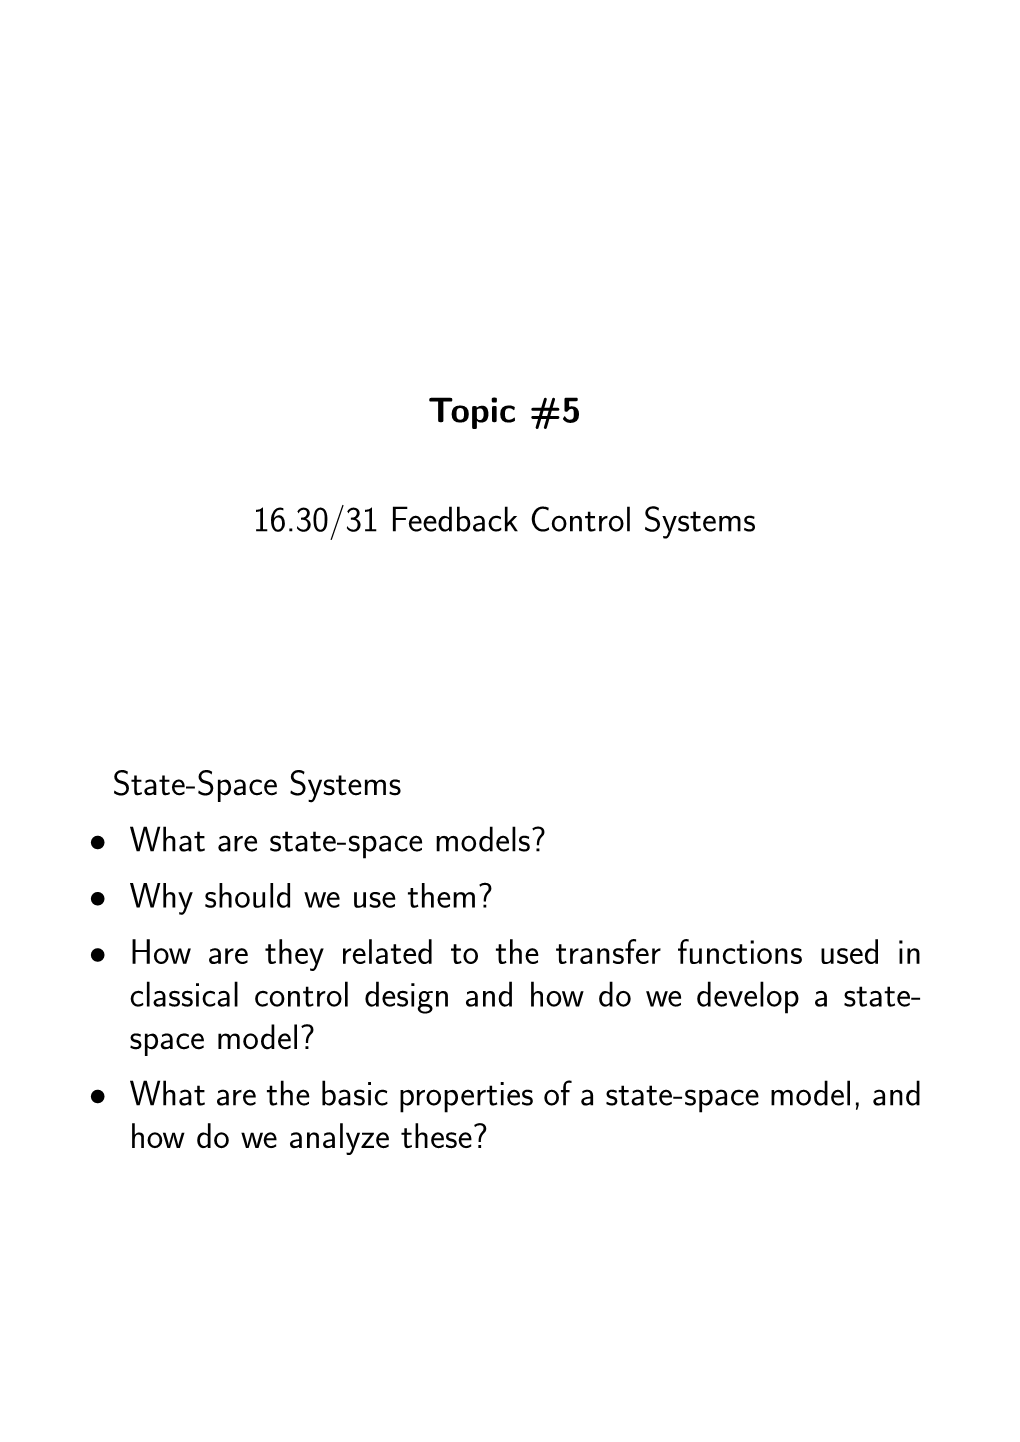 Introduction to State-Space Models